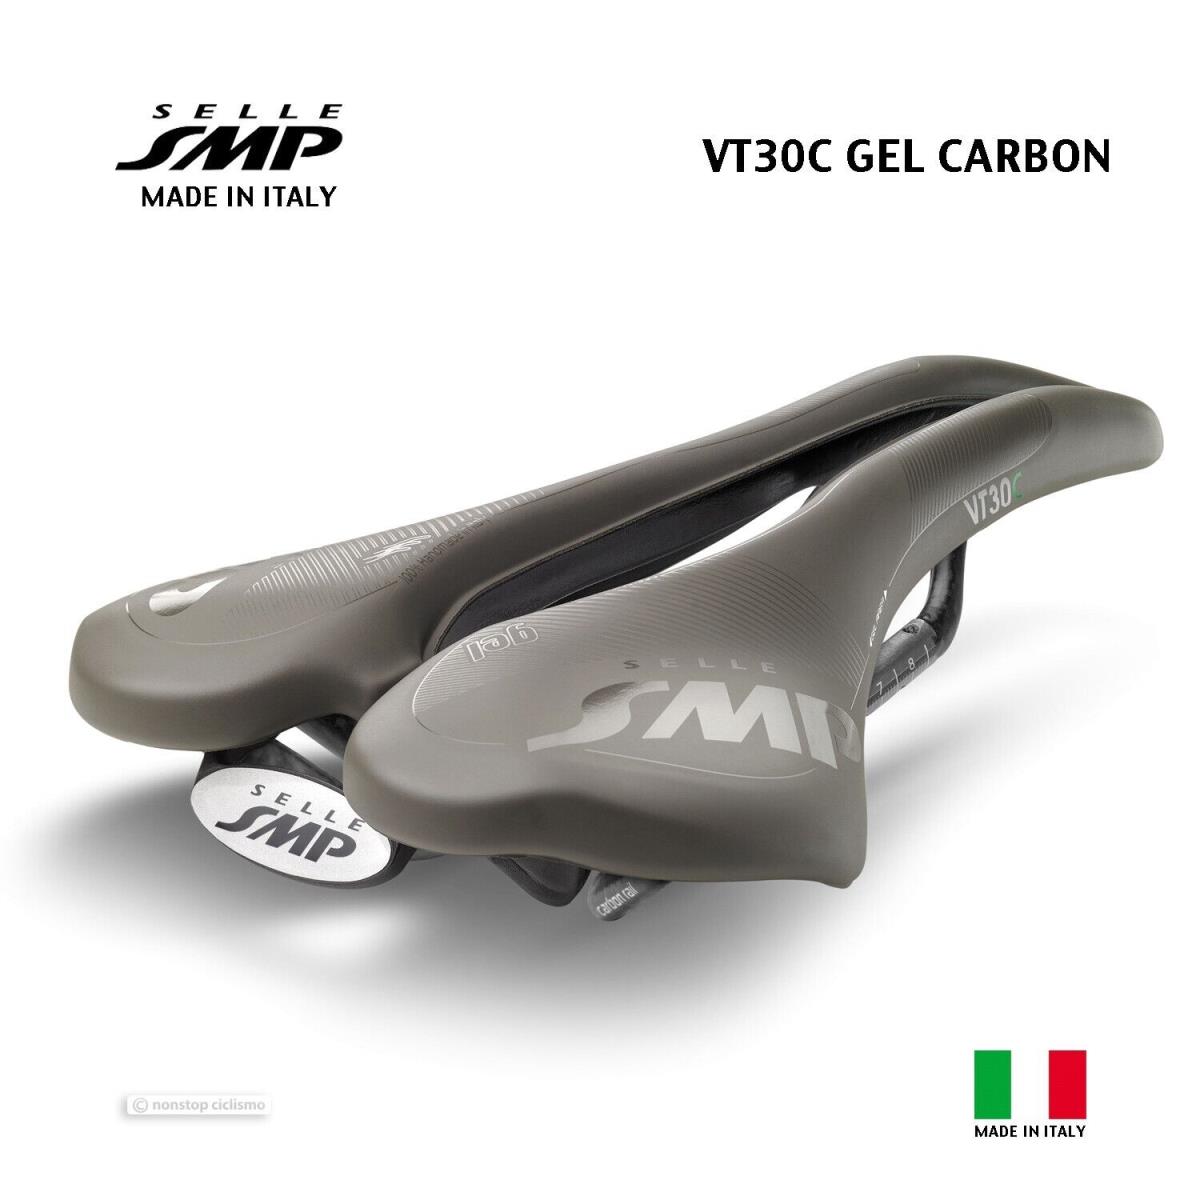 Selle Smp VT30C Gel Carbon Saddle : Grey-brown Gravel - Made IN Italy